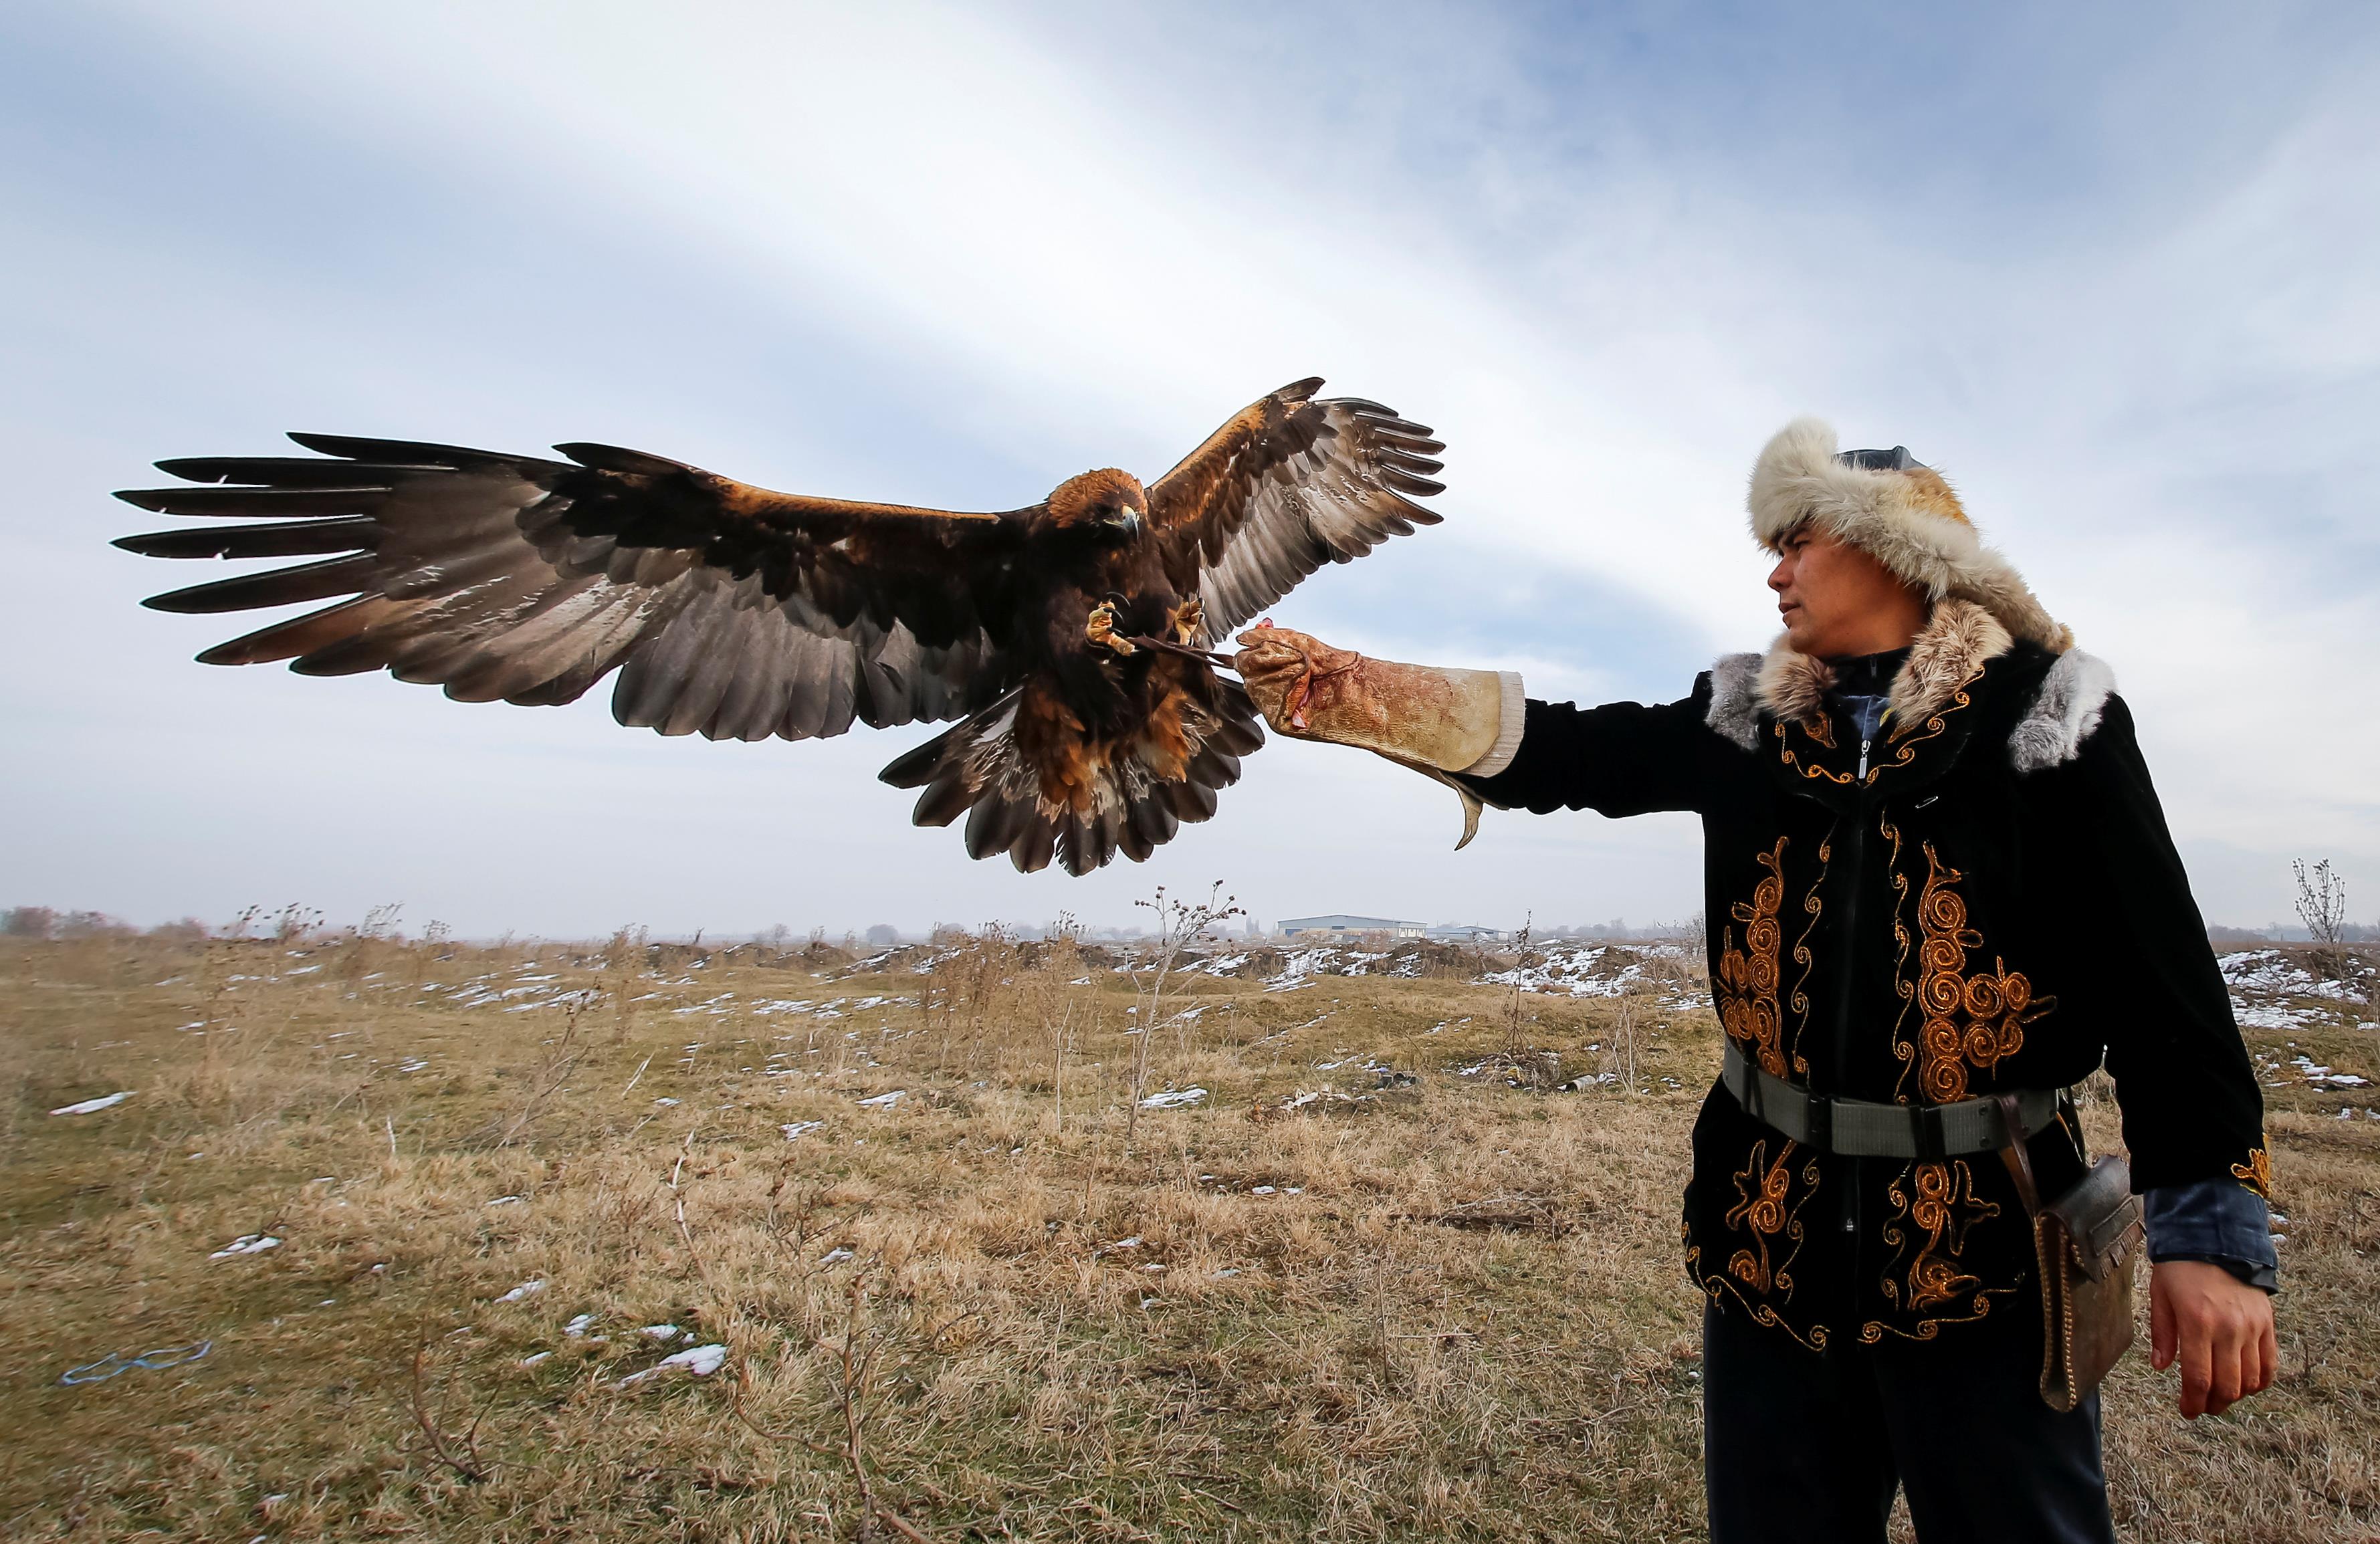 Arman Kushkarov raises a hand for landing of his tamed bird during training outside of the village o